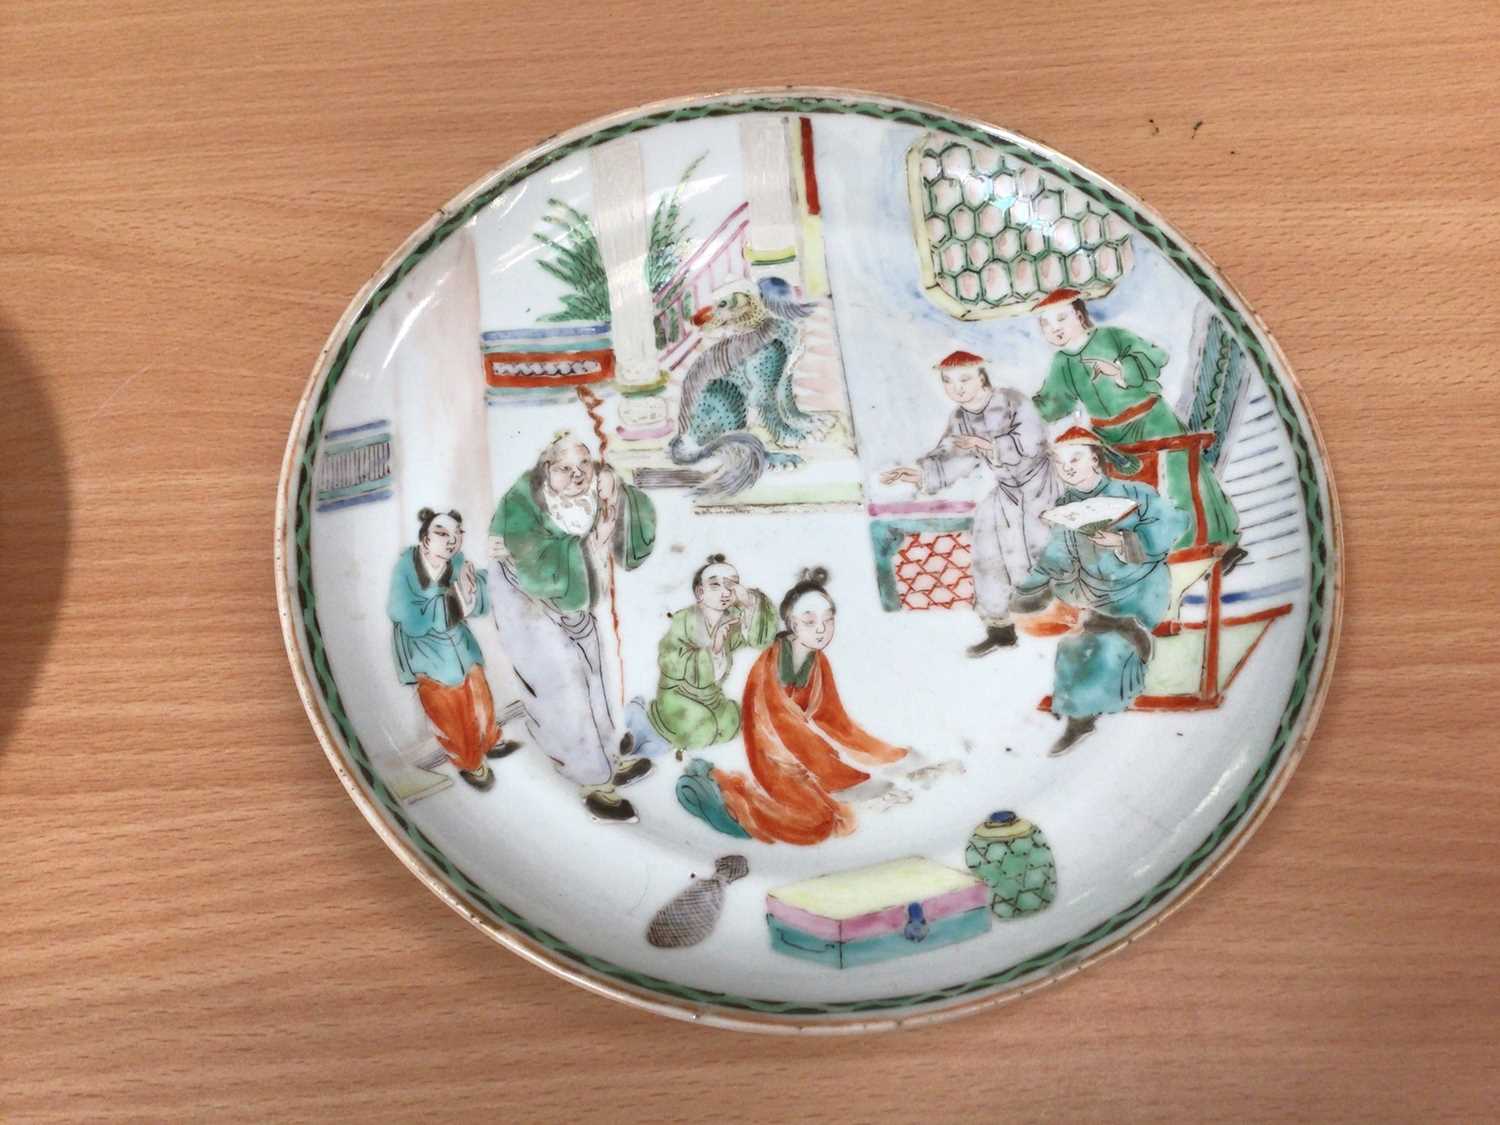 Six 19th century Chinese polychrome porcelain plates decorated with figures, birds and flowers - Image 11 of 12